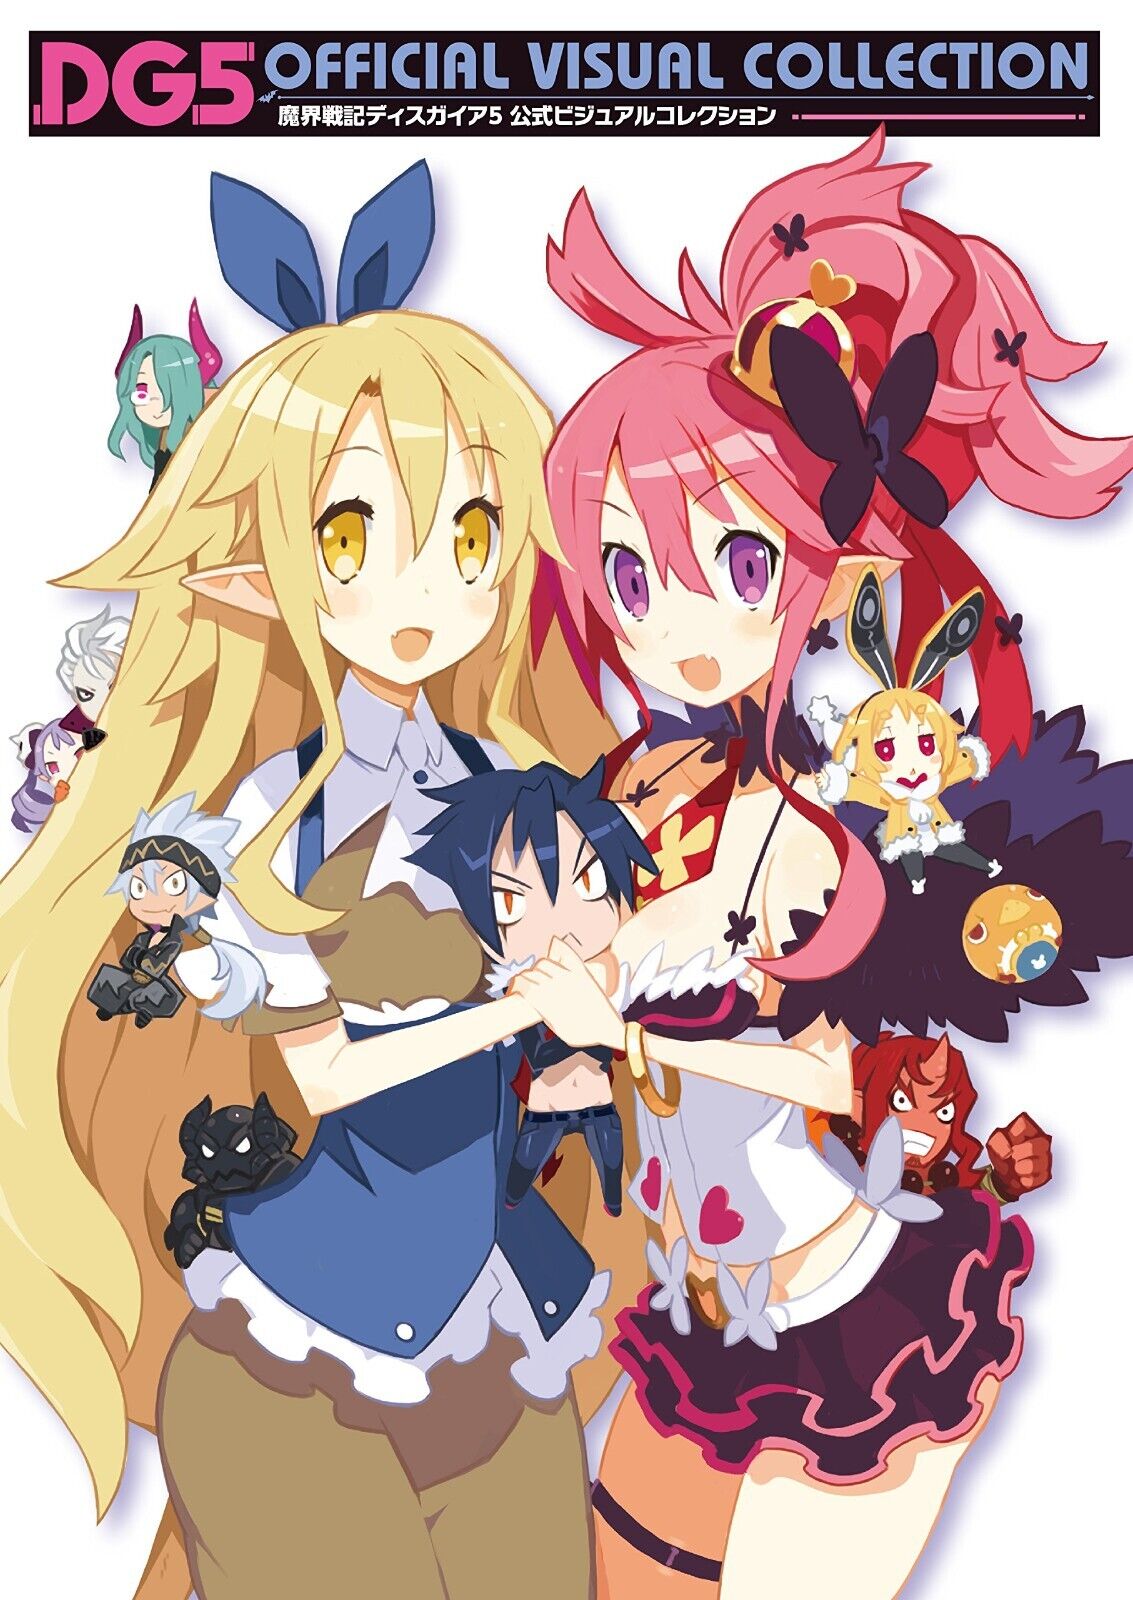 Disgaea 5 Official Visual Collection PS4 RPG Game Art Book Japanese used